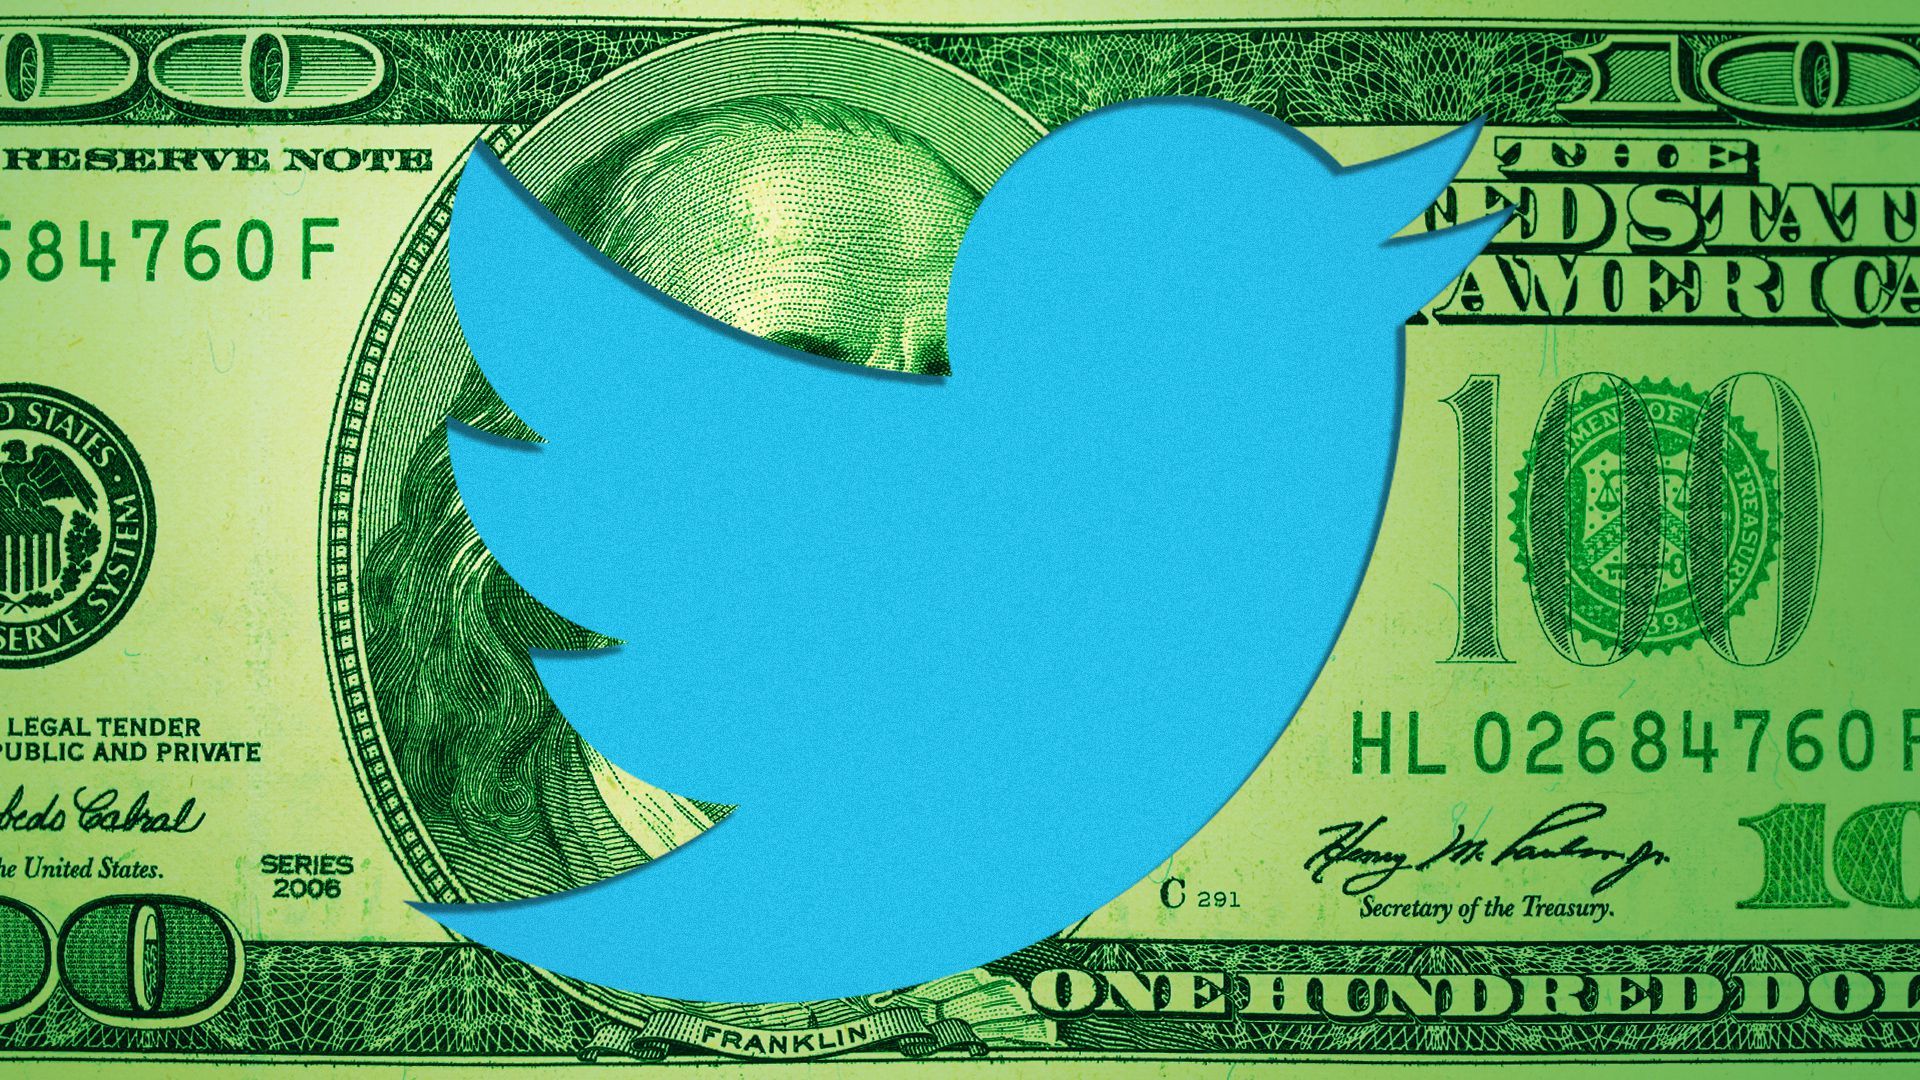 Illustration of the Twitter logo cut out of a hundred dollar bill